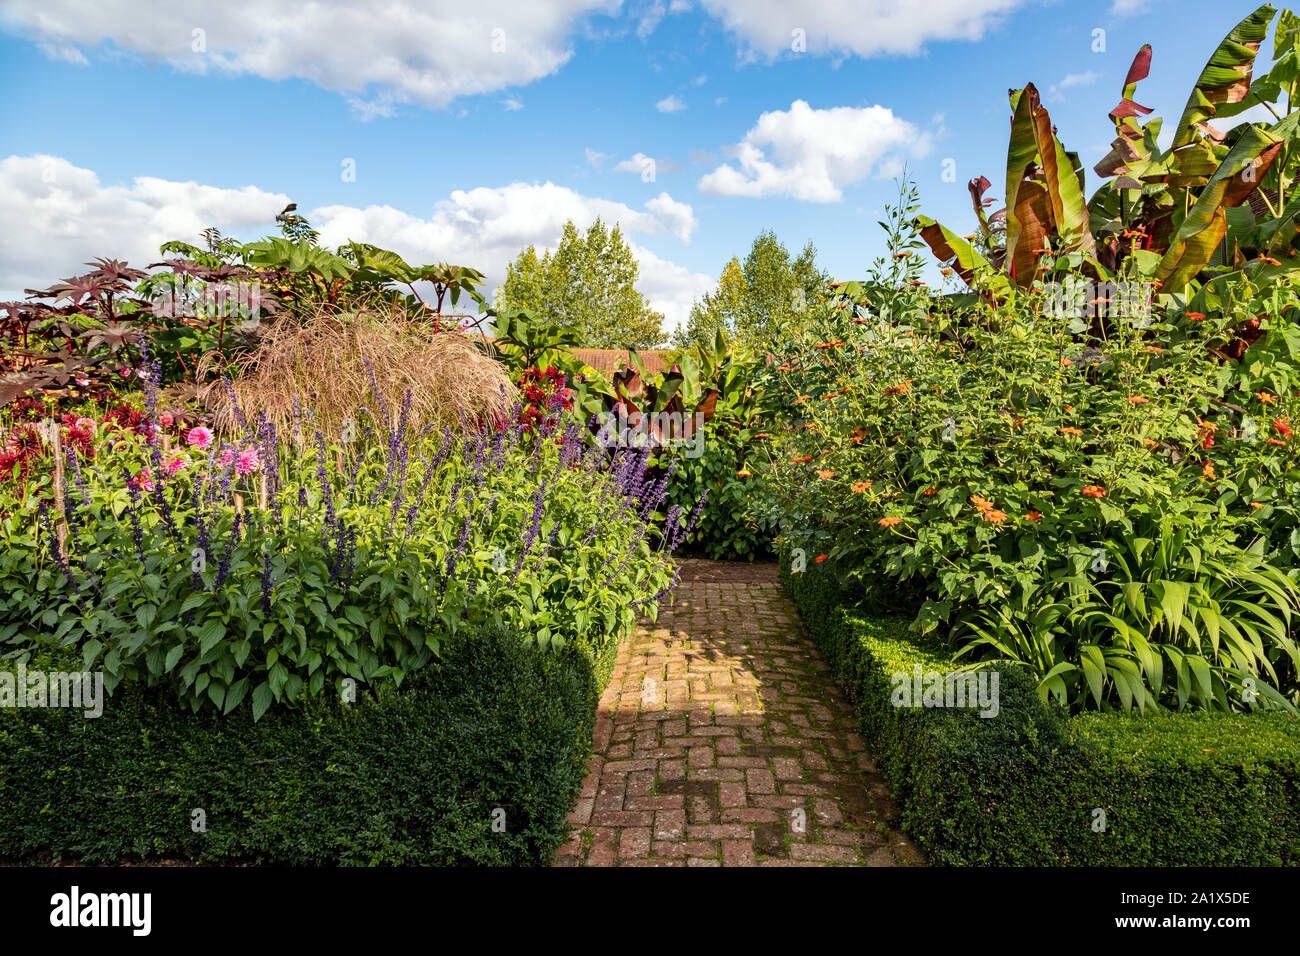 Inviting pathway along various ornamental flower and plant areas in ULTING WICK GARDEN, Maldon, England, United Kingdom. Stock Photo